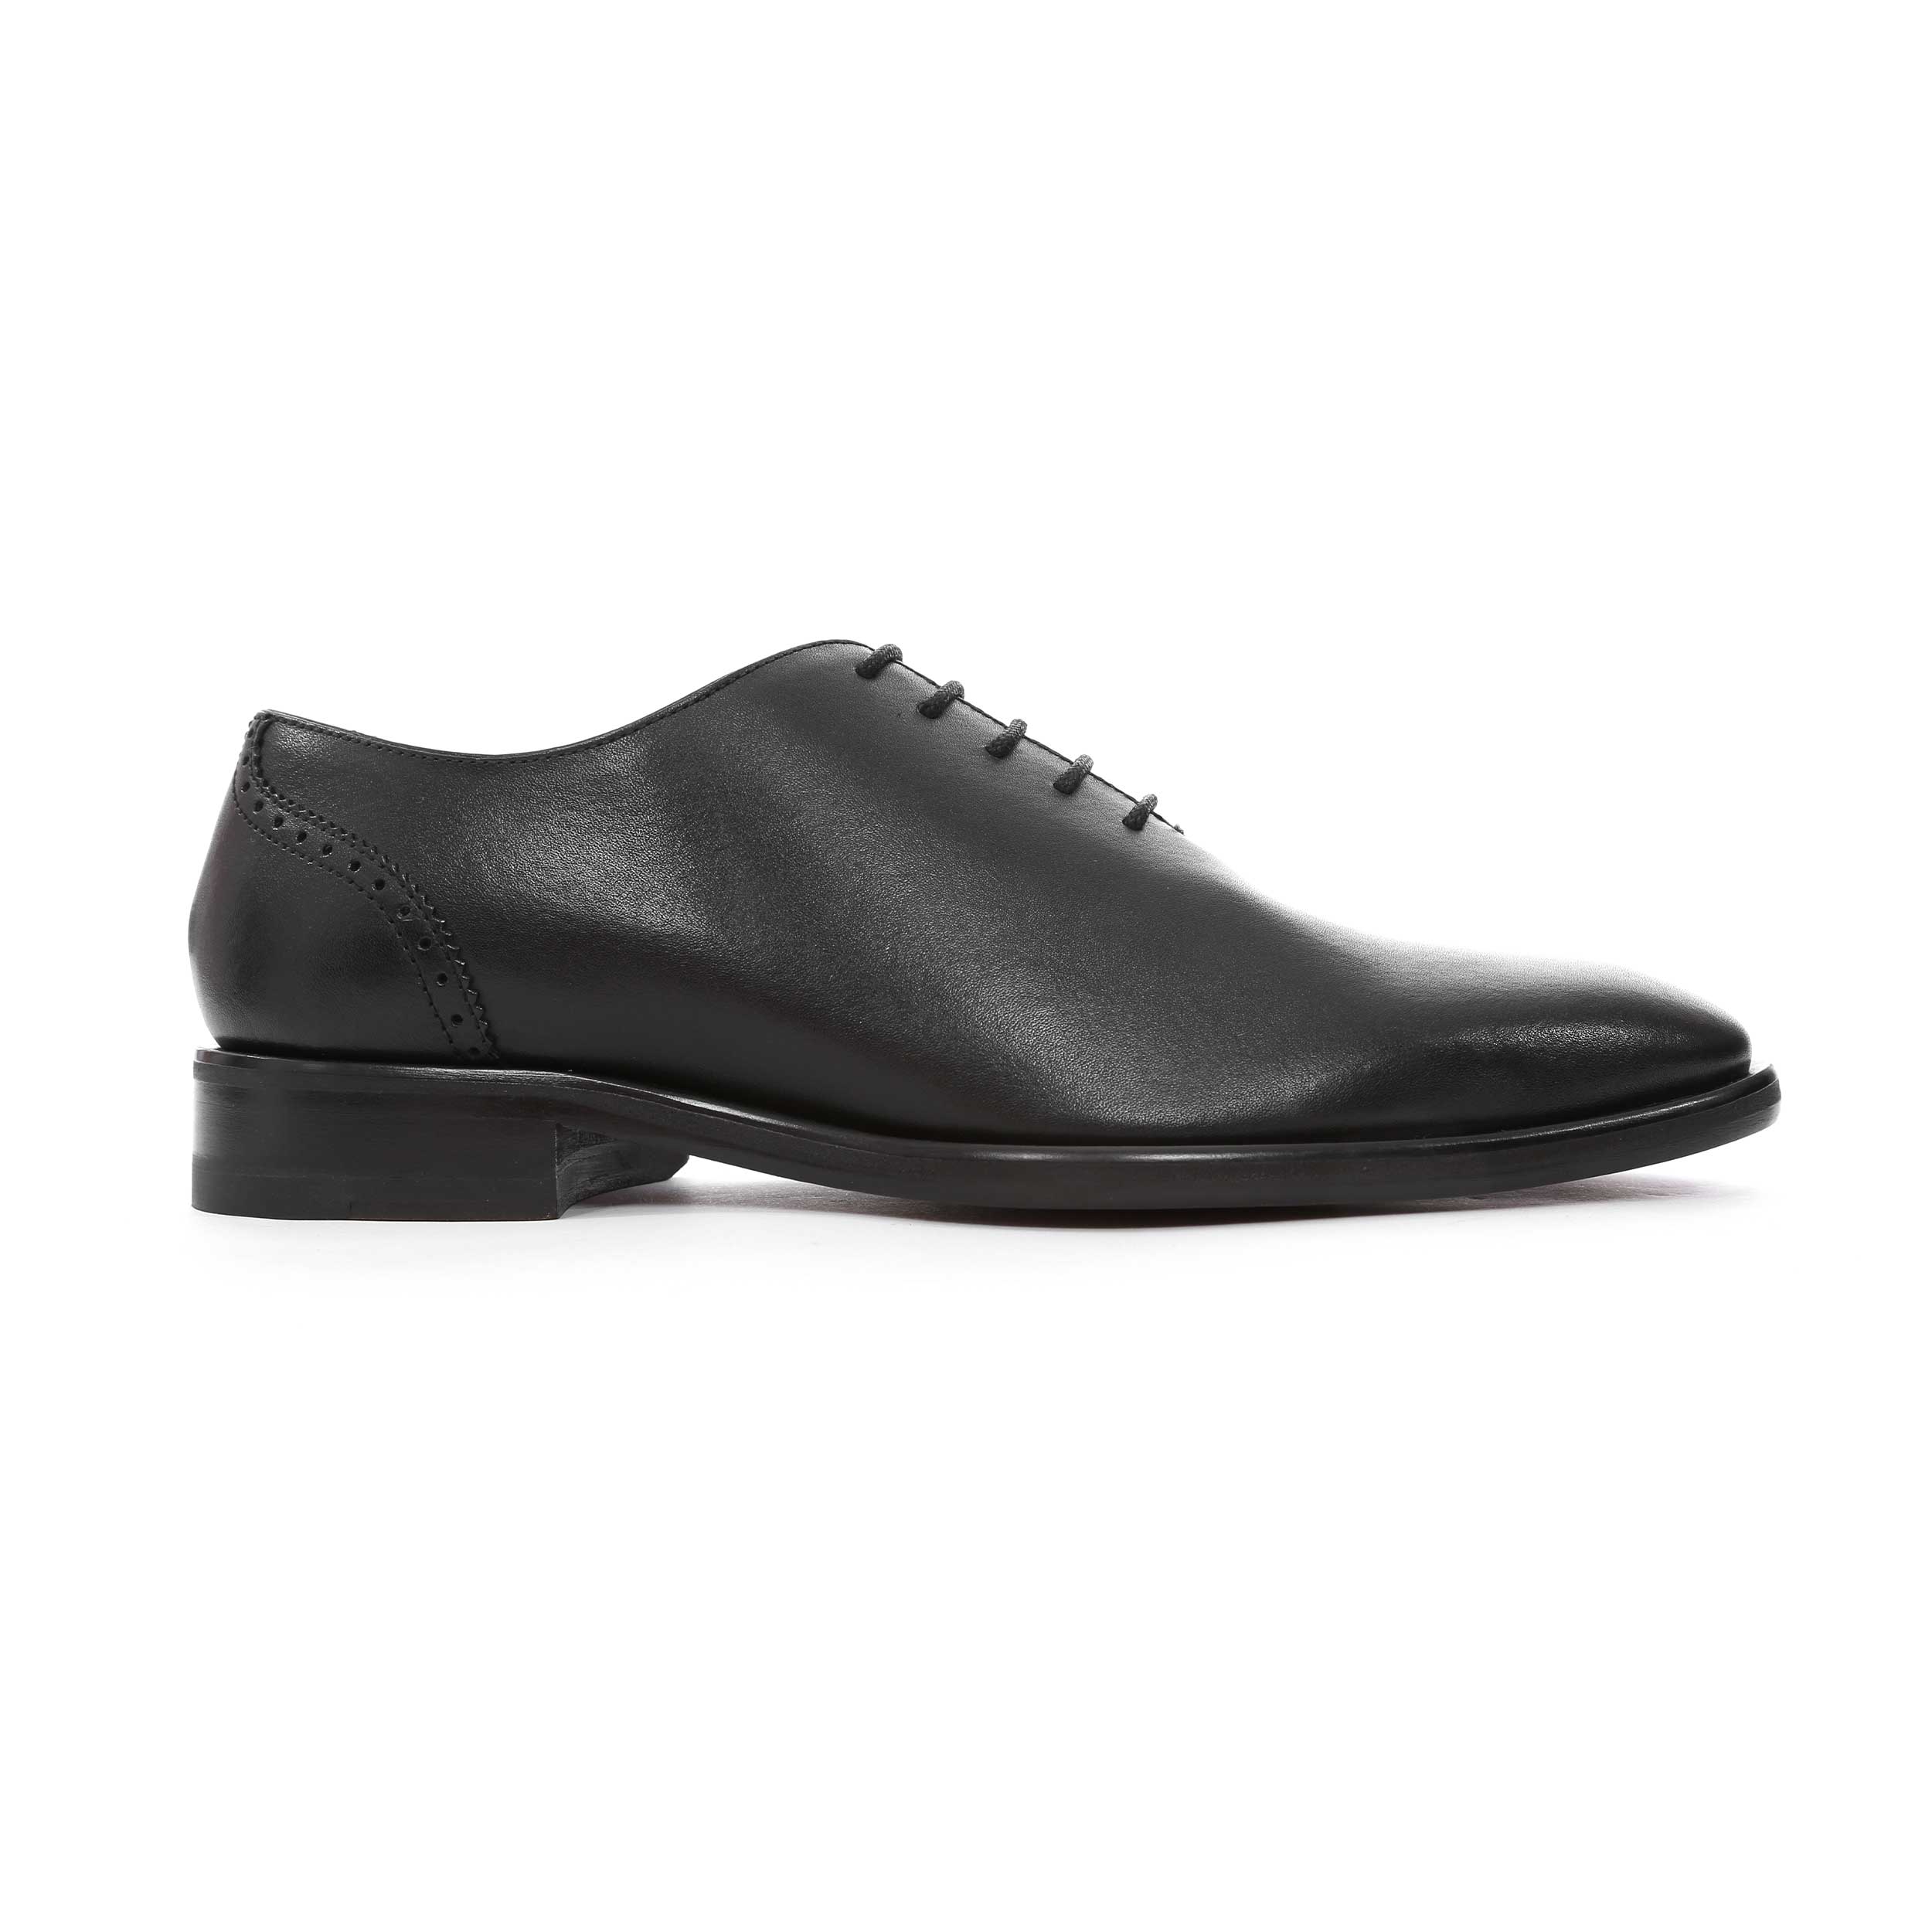 Oliver Sweeney Cropwell Shoe in Black